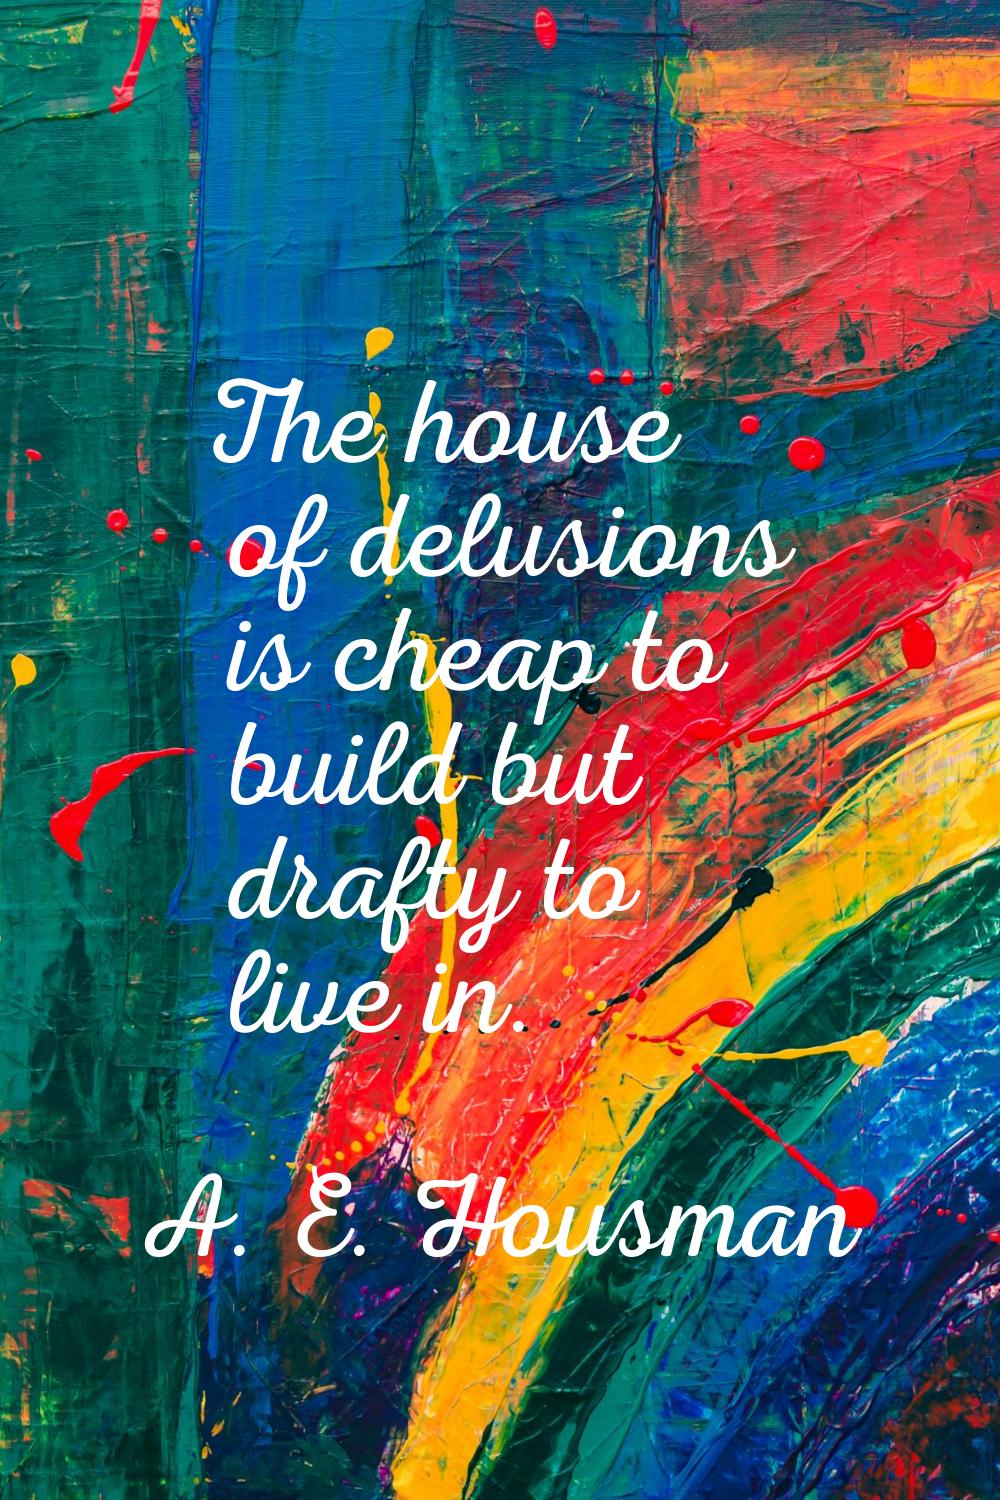 The house of delusions is cheap to build but drafty to live in.